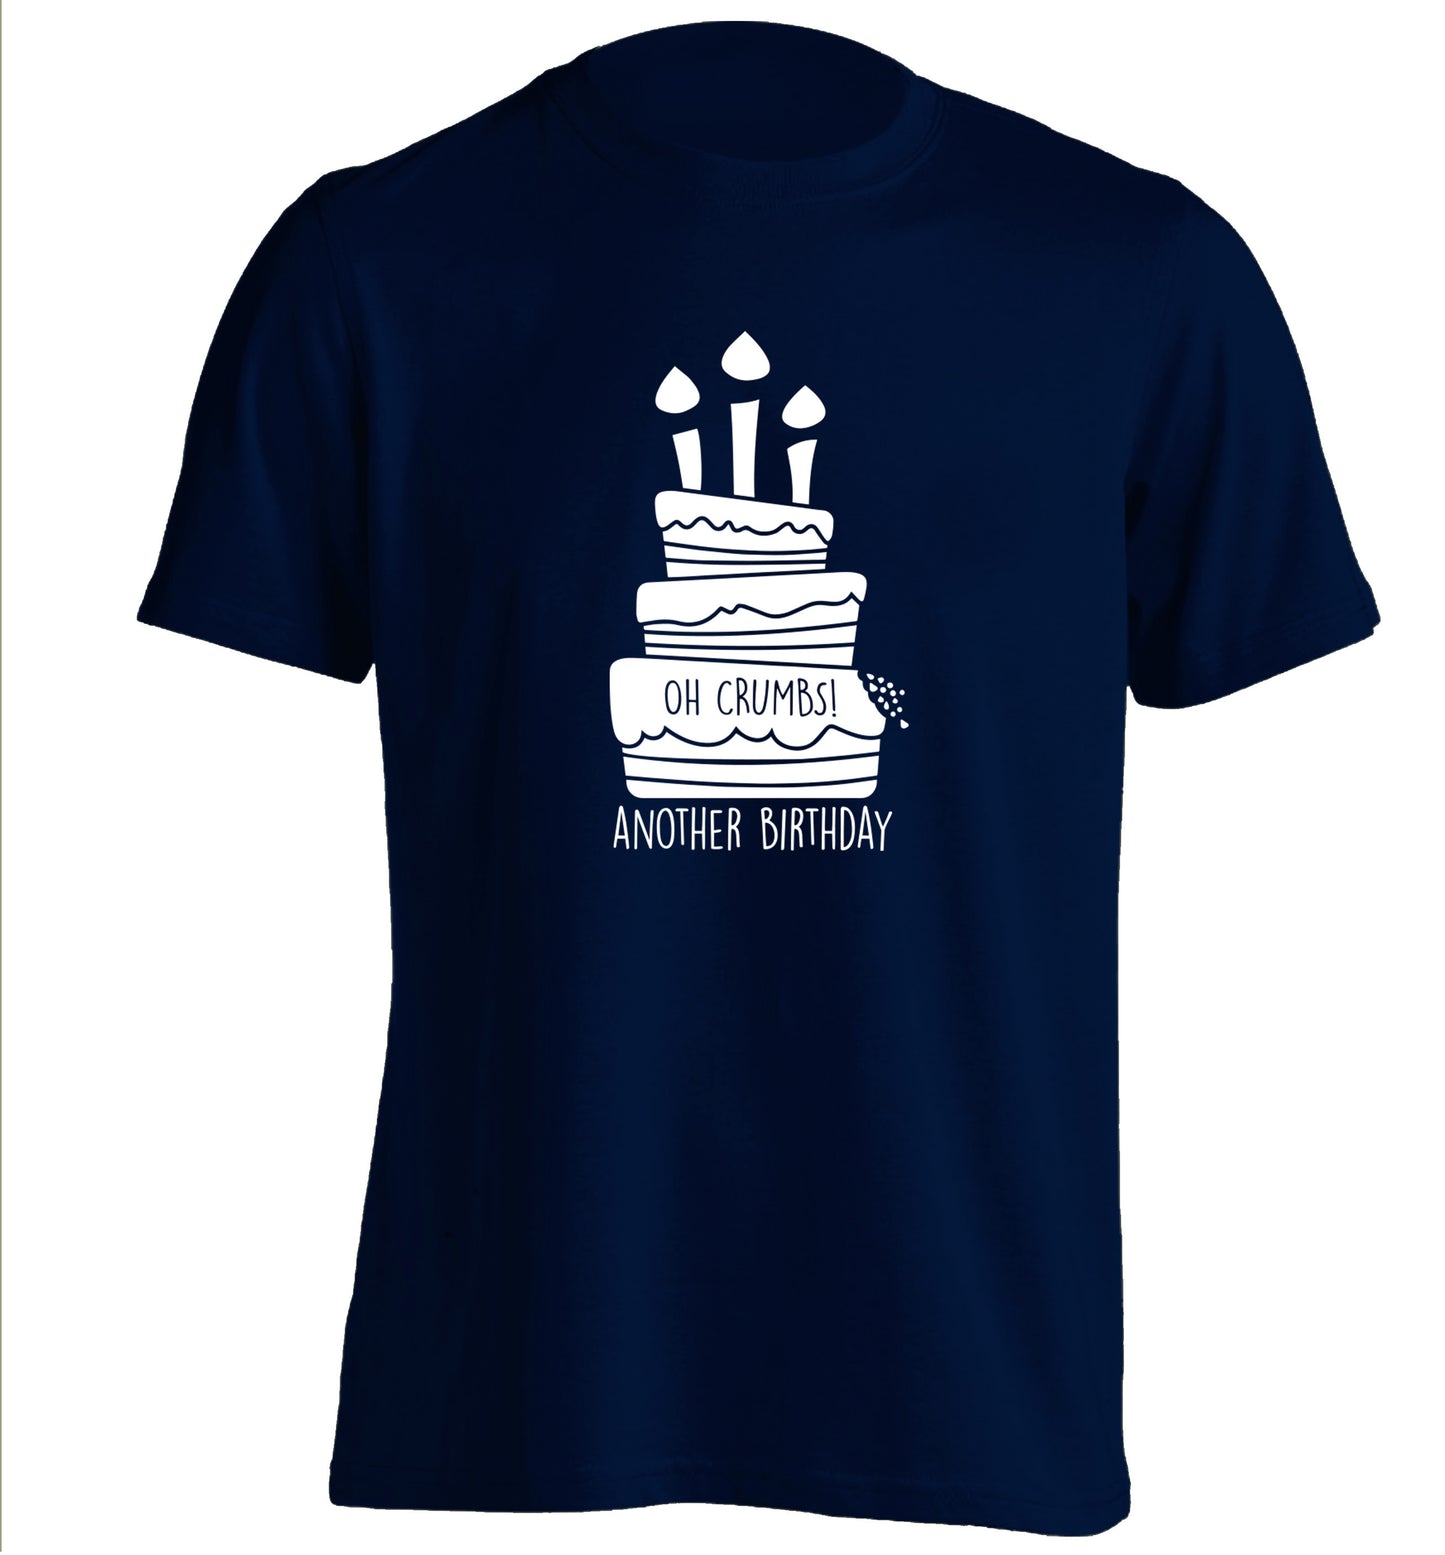 Oh crumbs another birthday! adults unisex navy Tshirt 2XL